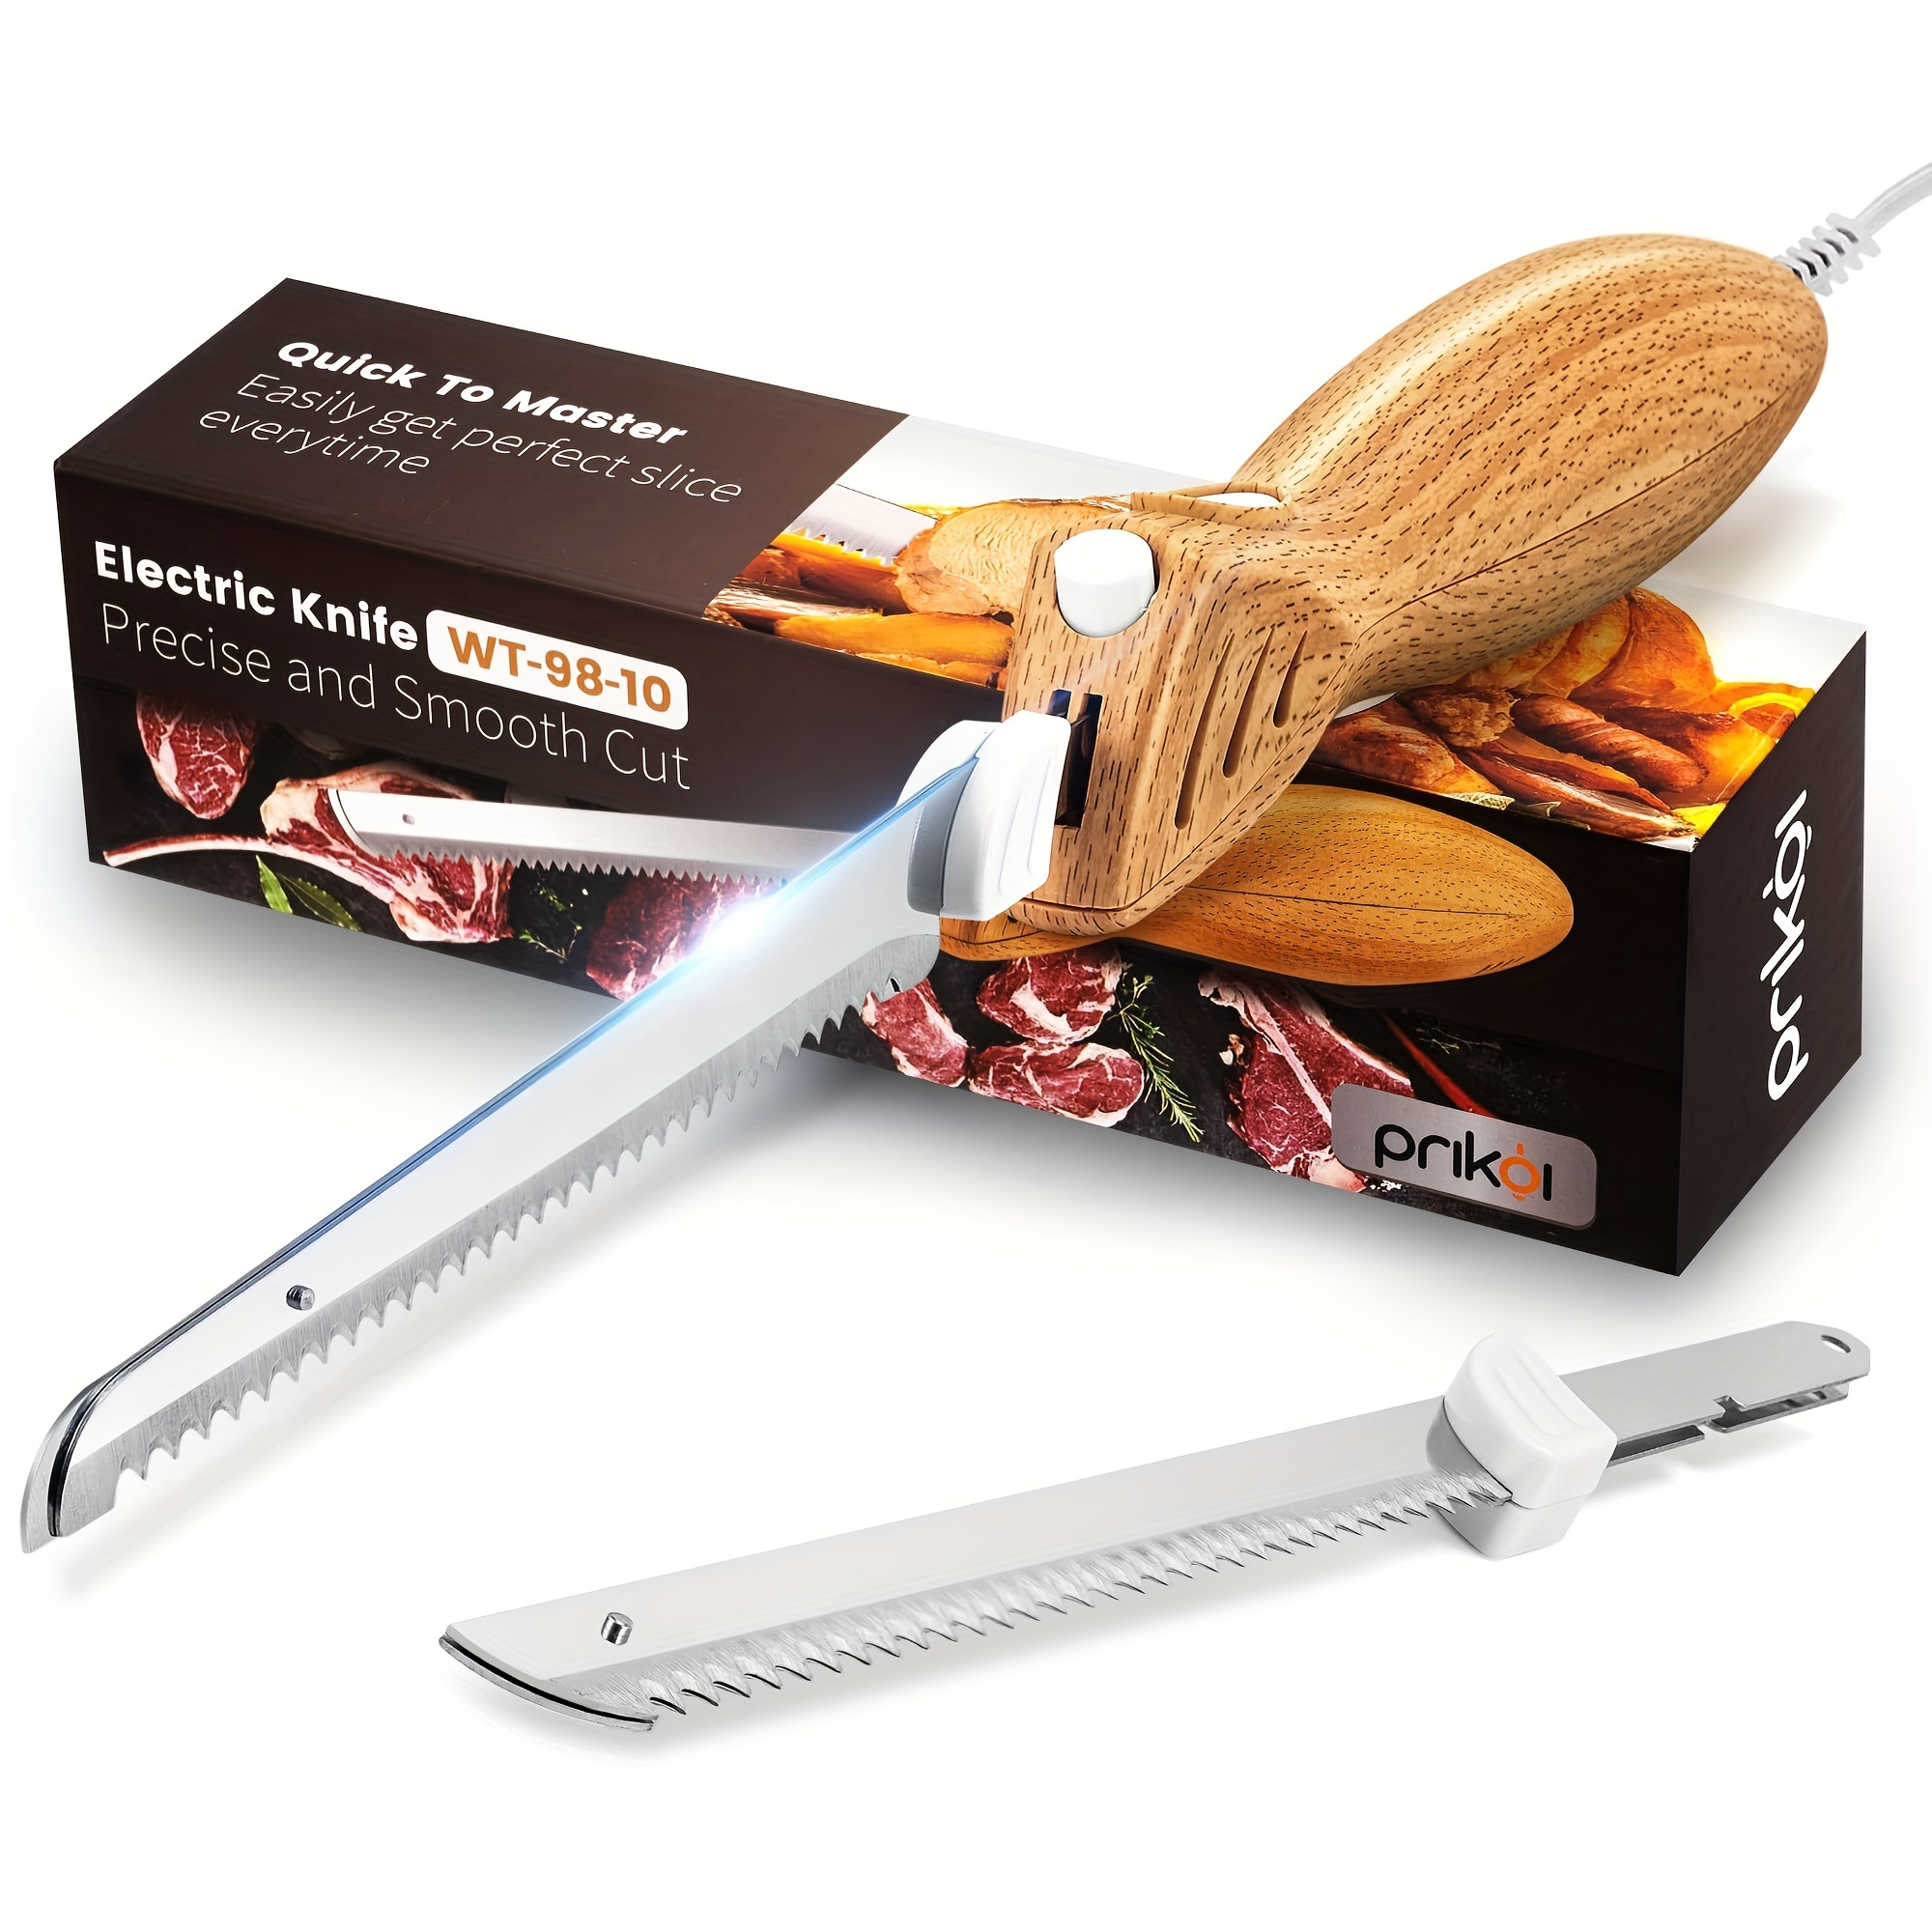 

Susteas Electric Knife - Easy-slice Serrated Edge Blades For Carving Meat, Bread, Turkey, Ribs, Fillet, Diy, Ergonomic Handle + 2 Blades For Raw & Cooked Food (faux Wood)